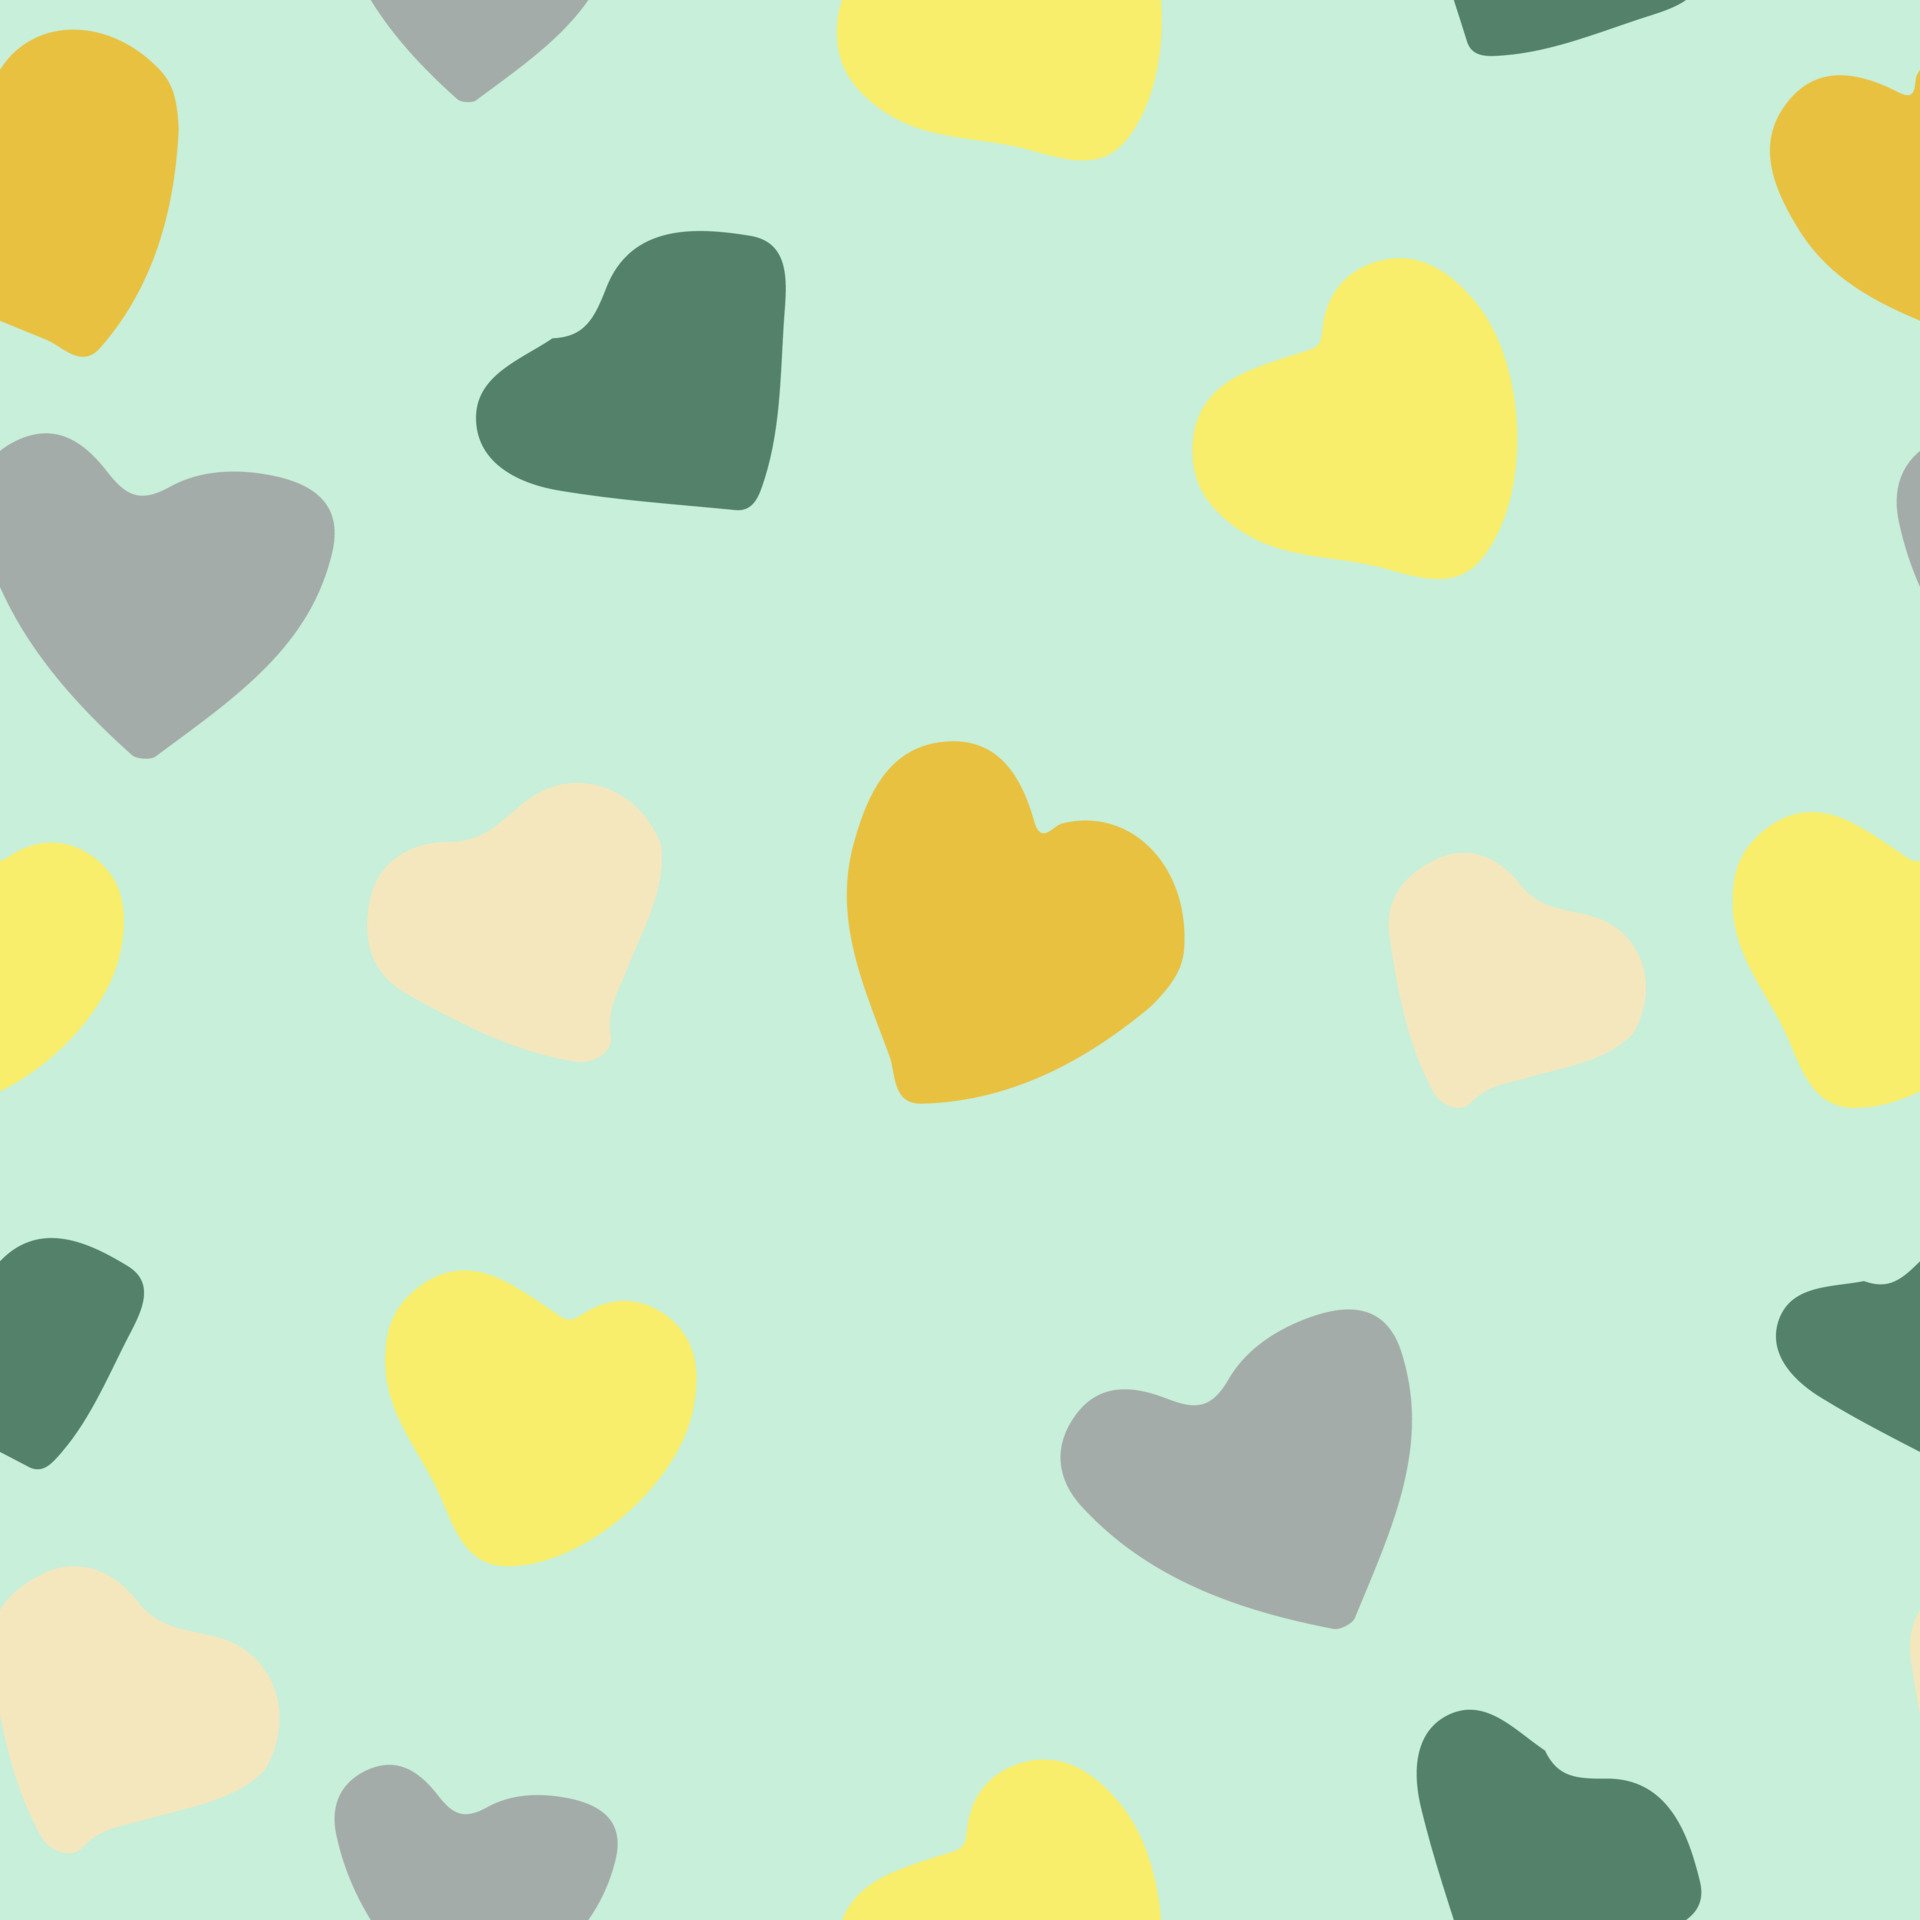 cute hearts seamless pattern in trending color 2021. hand drawn minimalism simple. wallpaper, textiles, wrapping paper, decor. gray, gold, yellow, green. love, valentines day